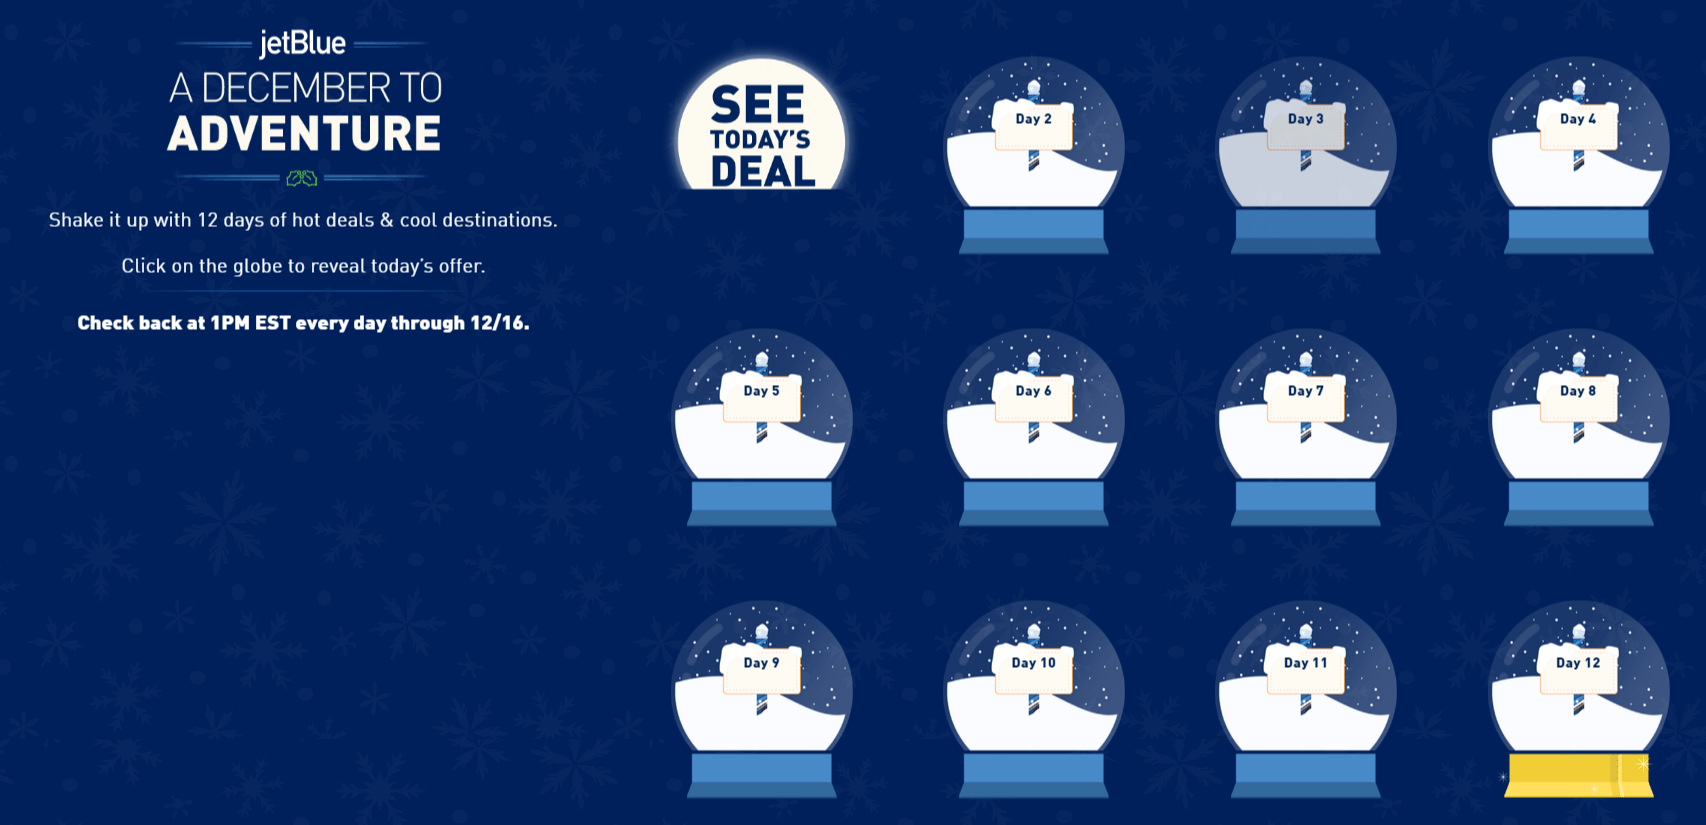 JetBlue Offering Twelve Days Of Christmas Sale - Doctor Of Credit1706 x 825